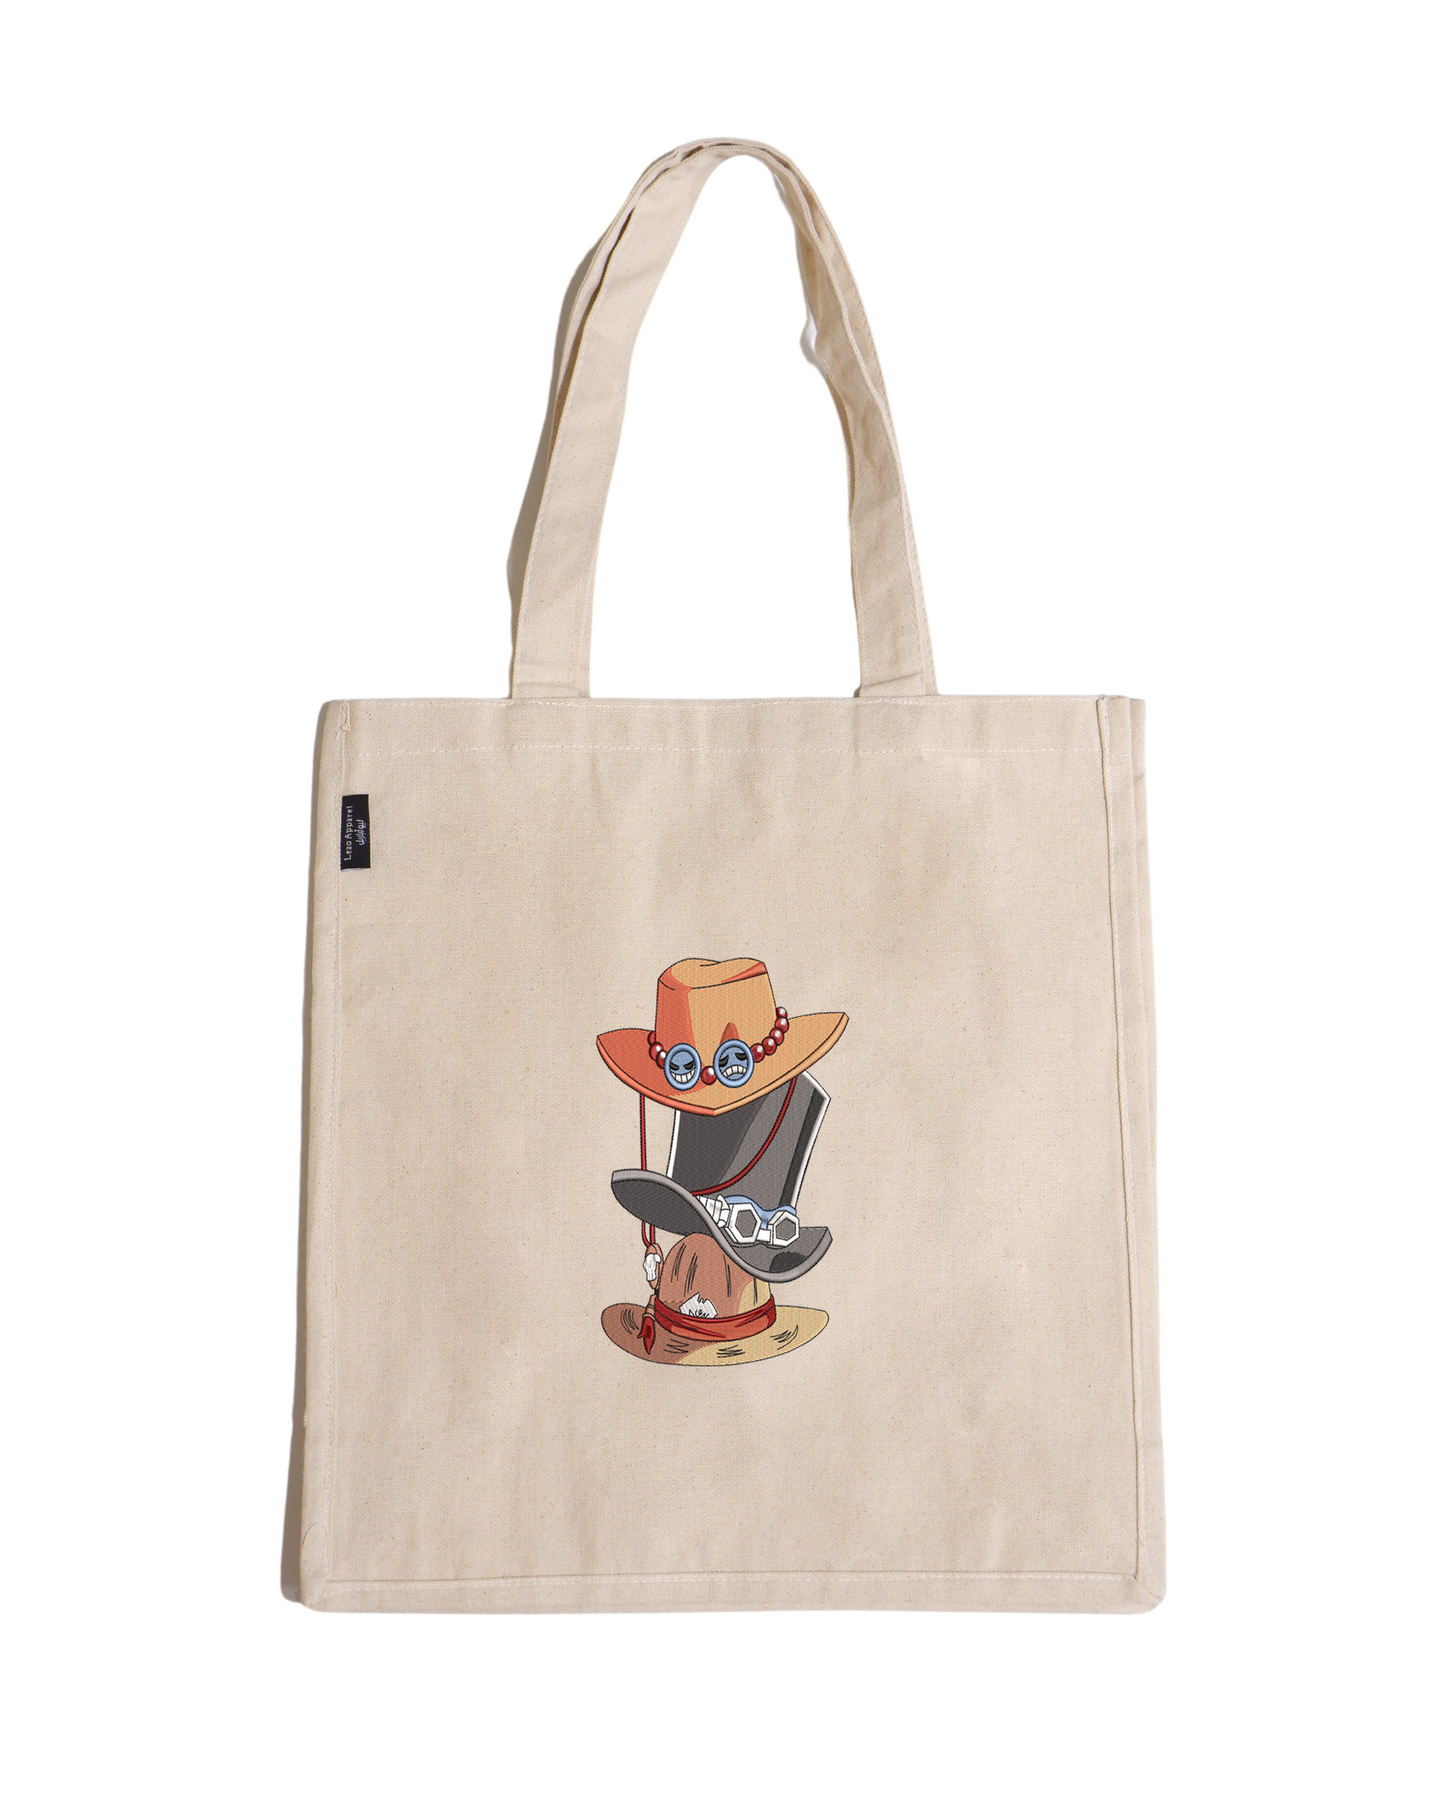 Luffy Ace Sabo Hats Tote Bag